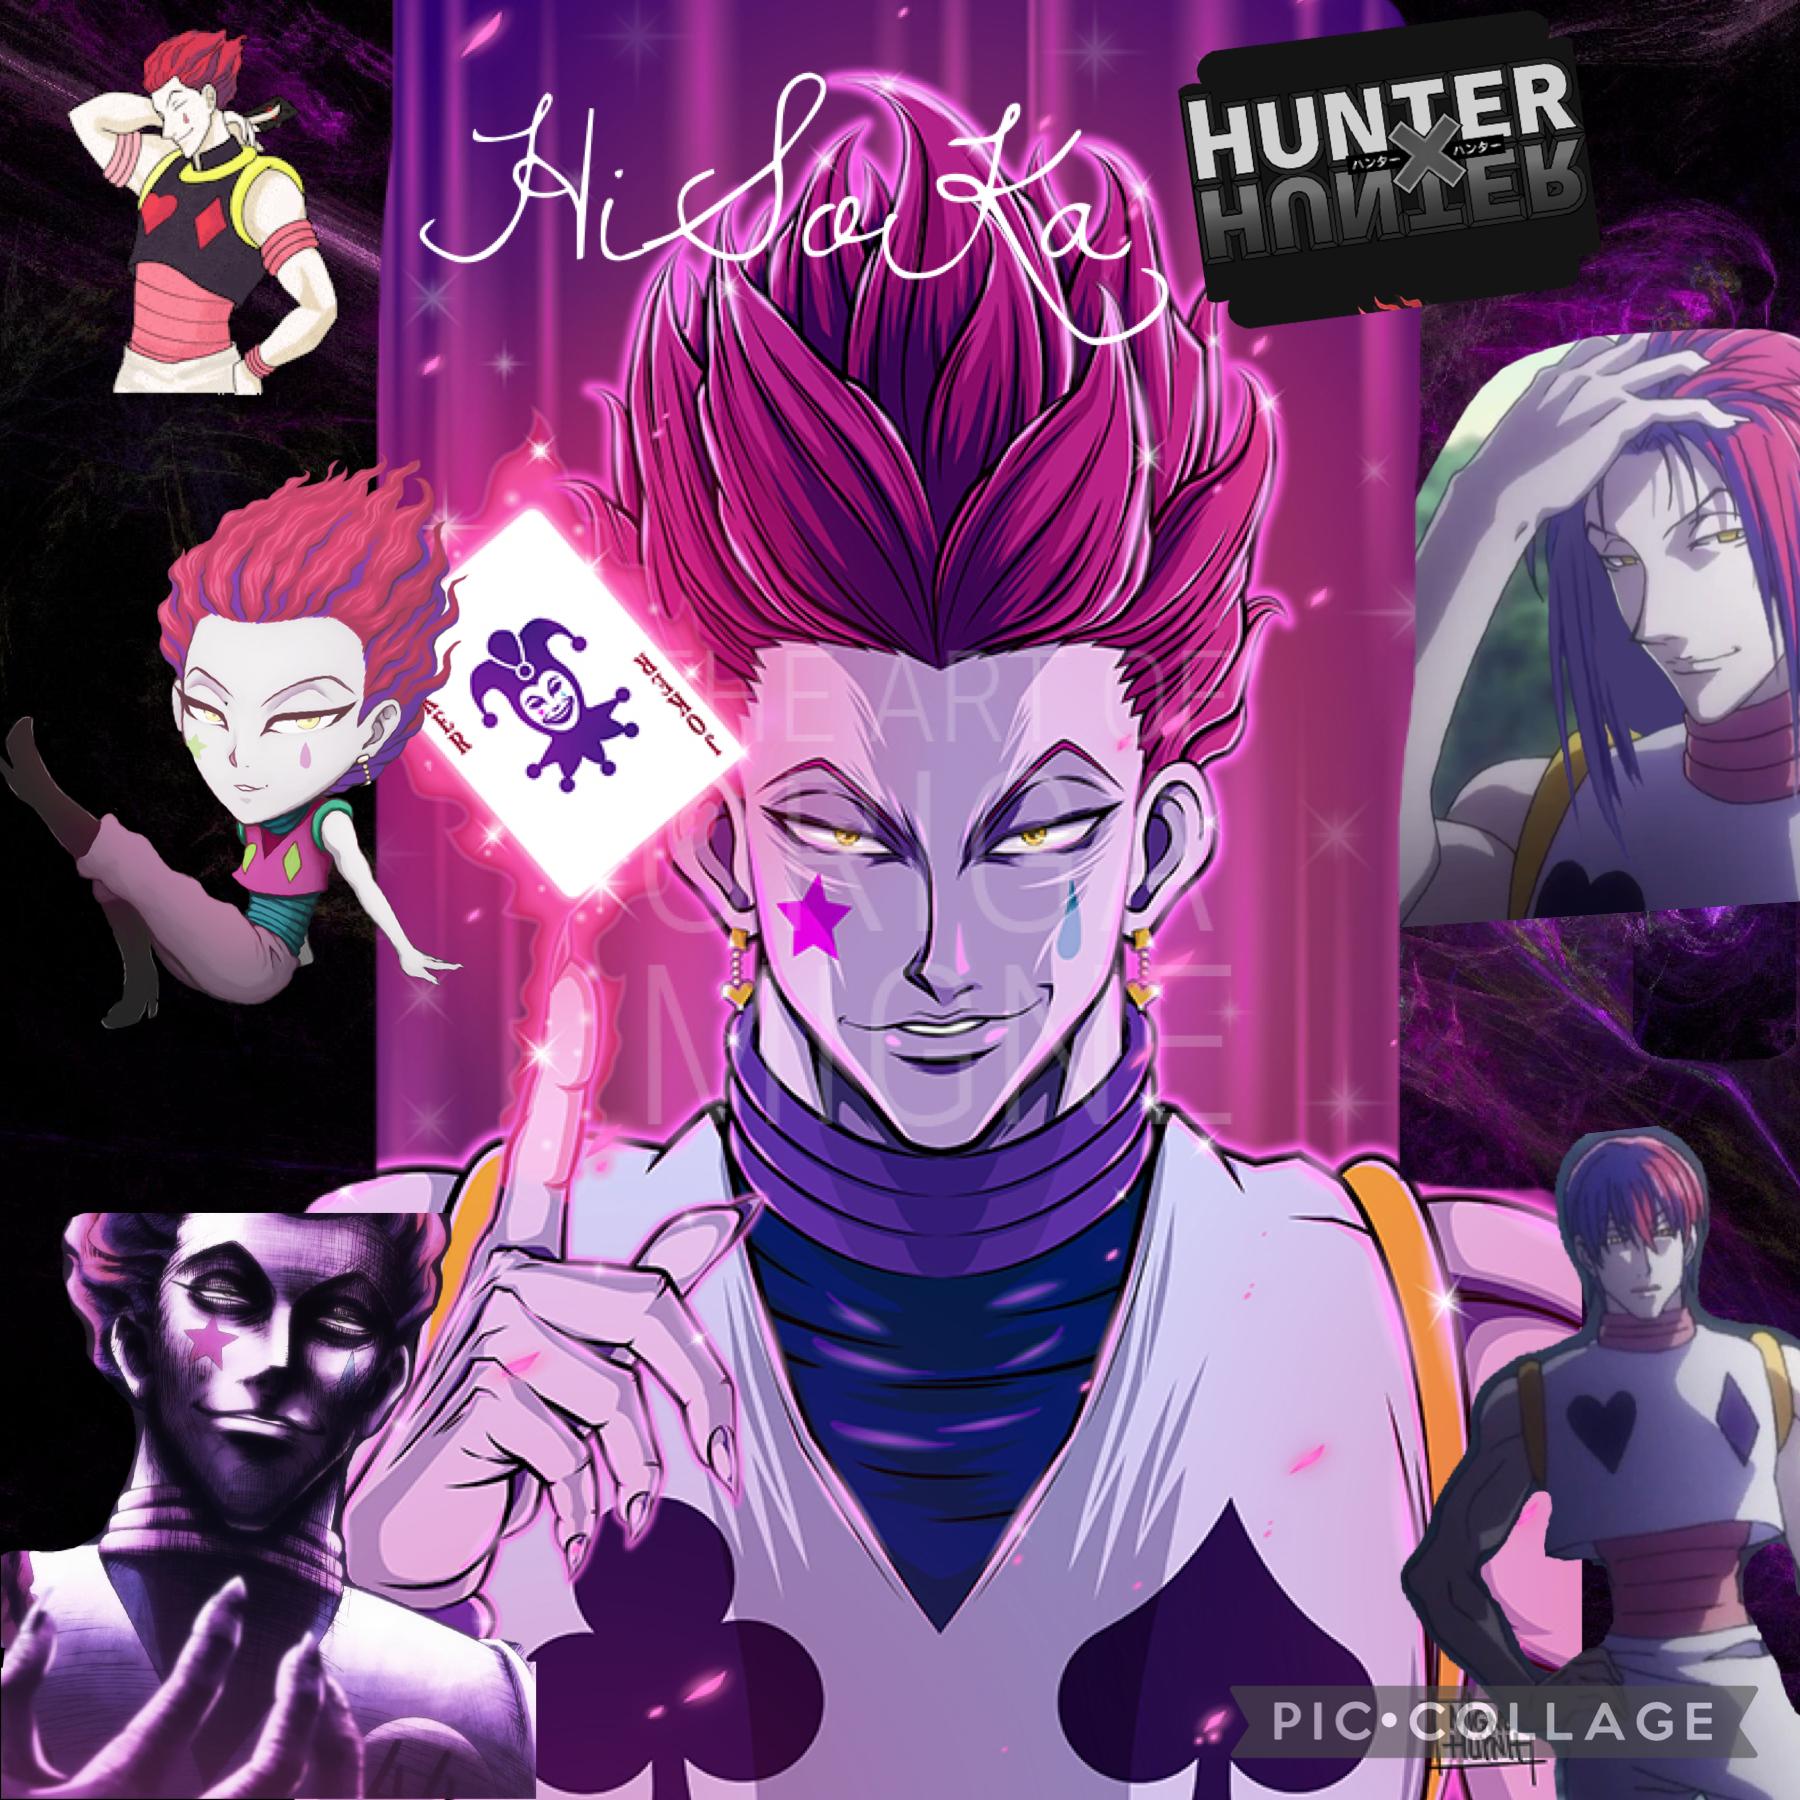 Hisoka from HxH he may be an animation but I’m a “big fan” 👀